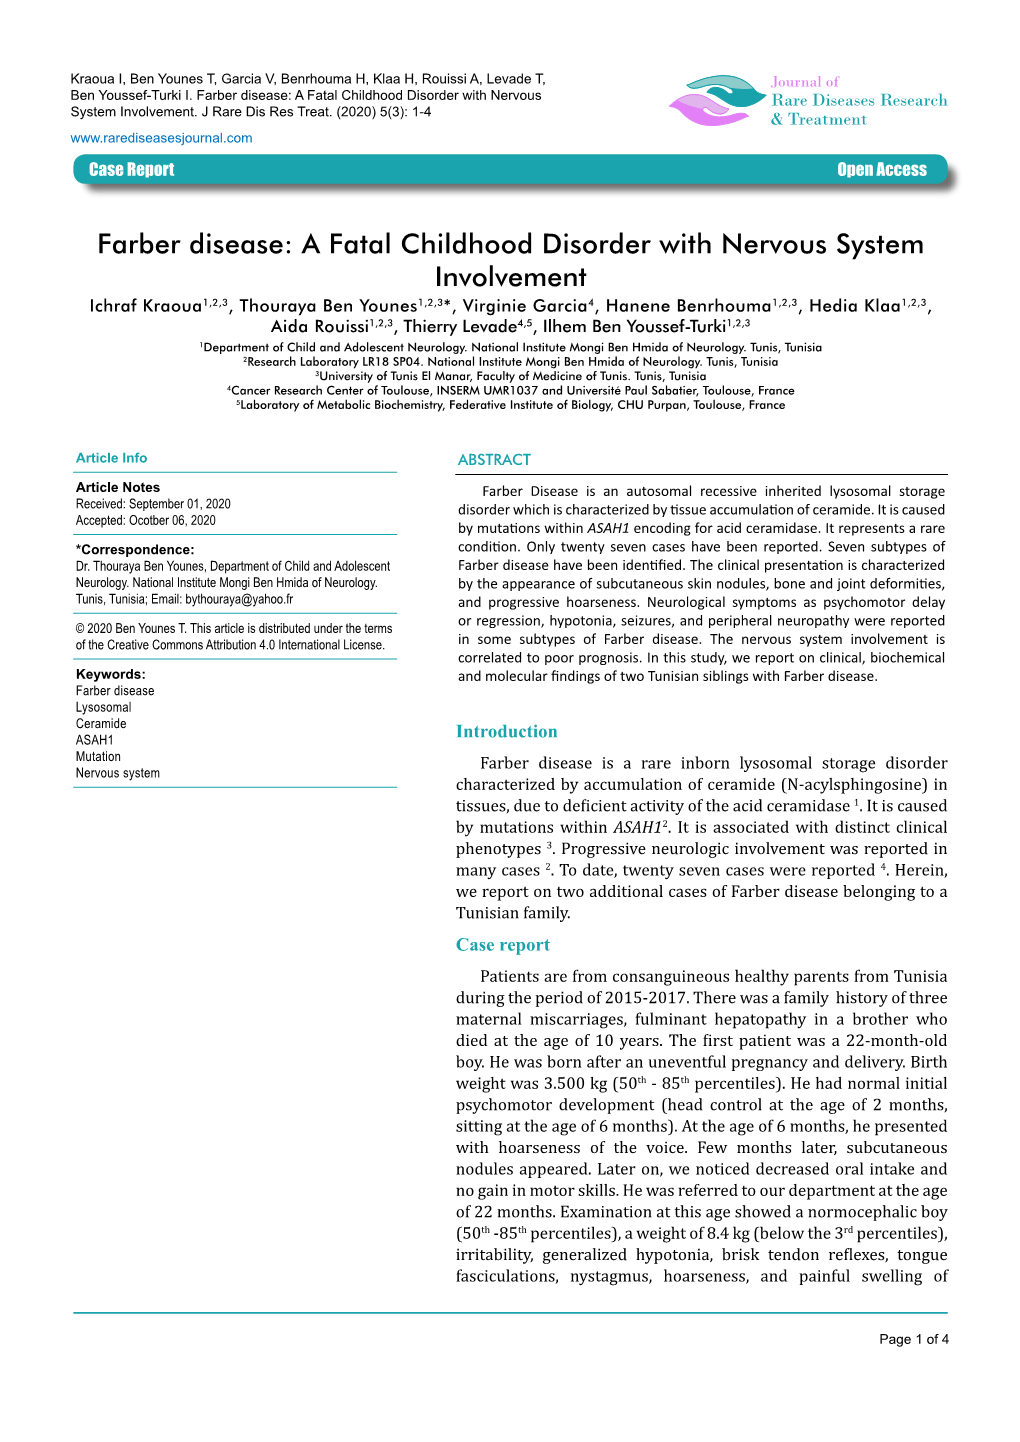 Farber Disease: a Fatal Childhood Disorder with Nervous System